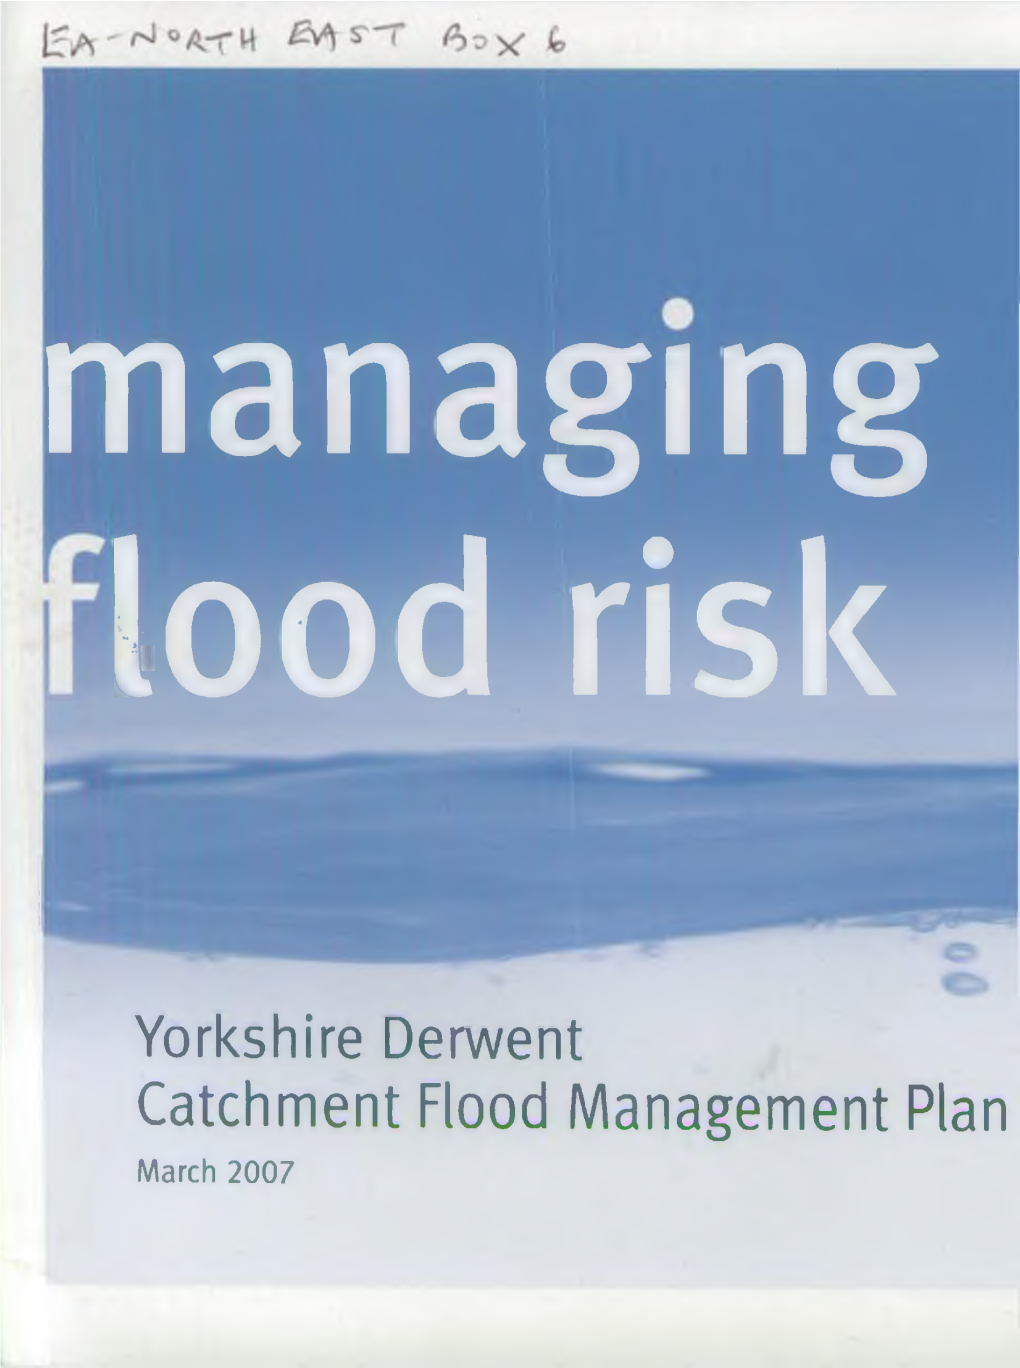 Yorkshire Derwent Catchment Rood Management Plan March 2007 Environment Agency We Are the Environment Agency